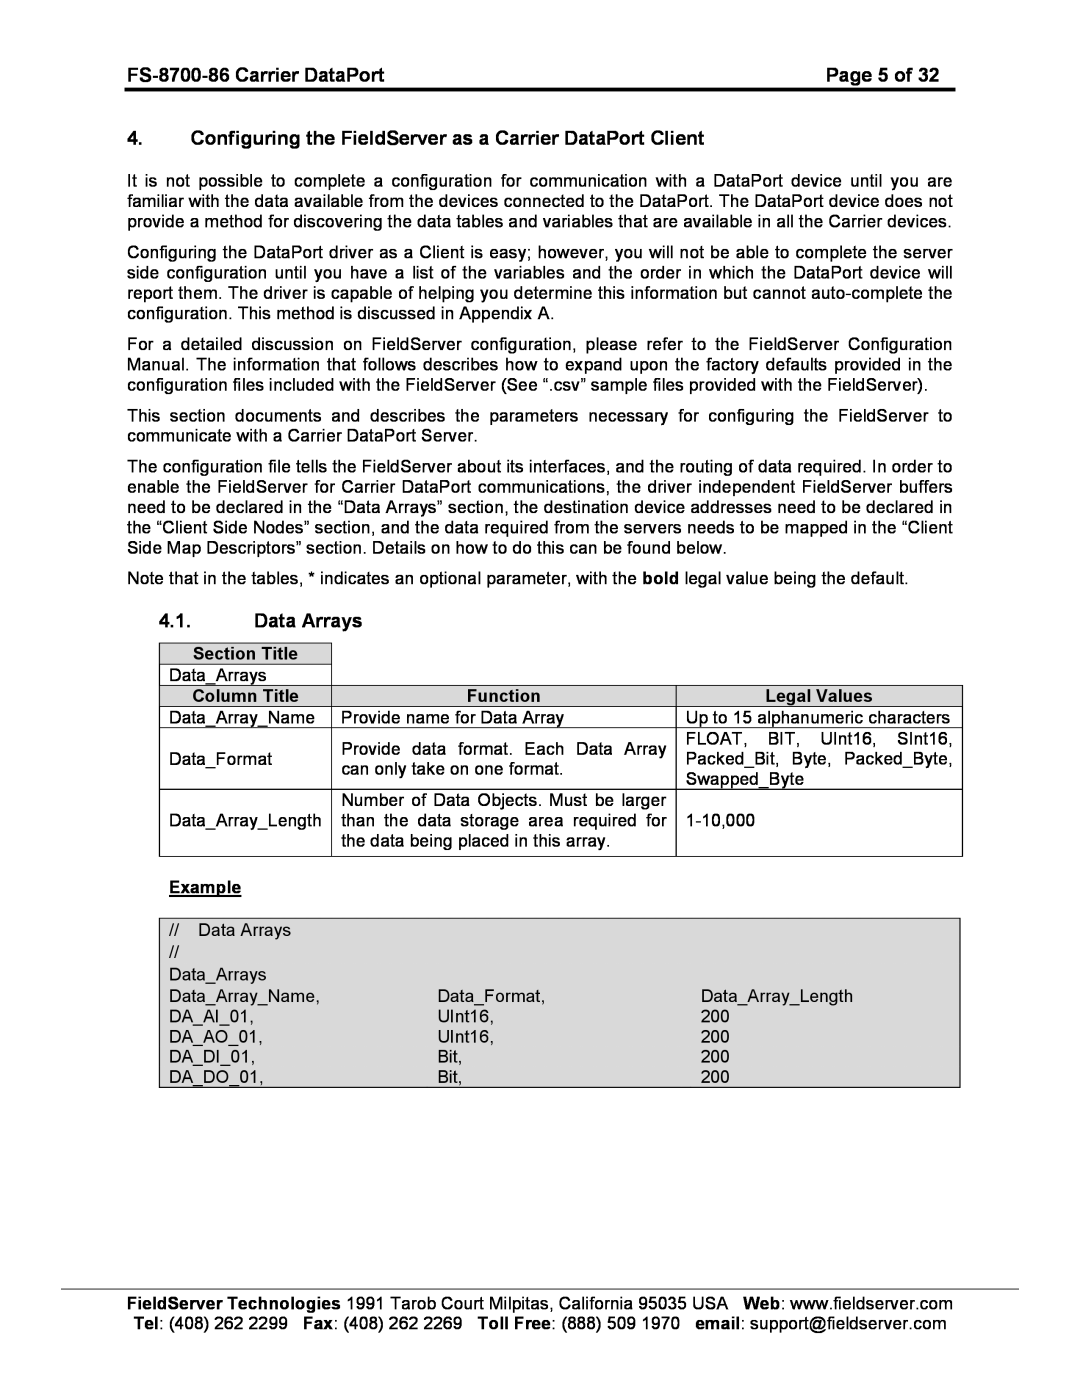 FieldServer FS-8700-86 instruction manual Page 5 of, Configuring the FieldServer as a Carrier DataPort Client, Data Arrays 